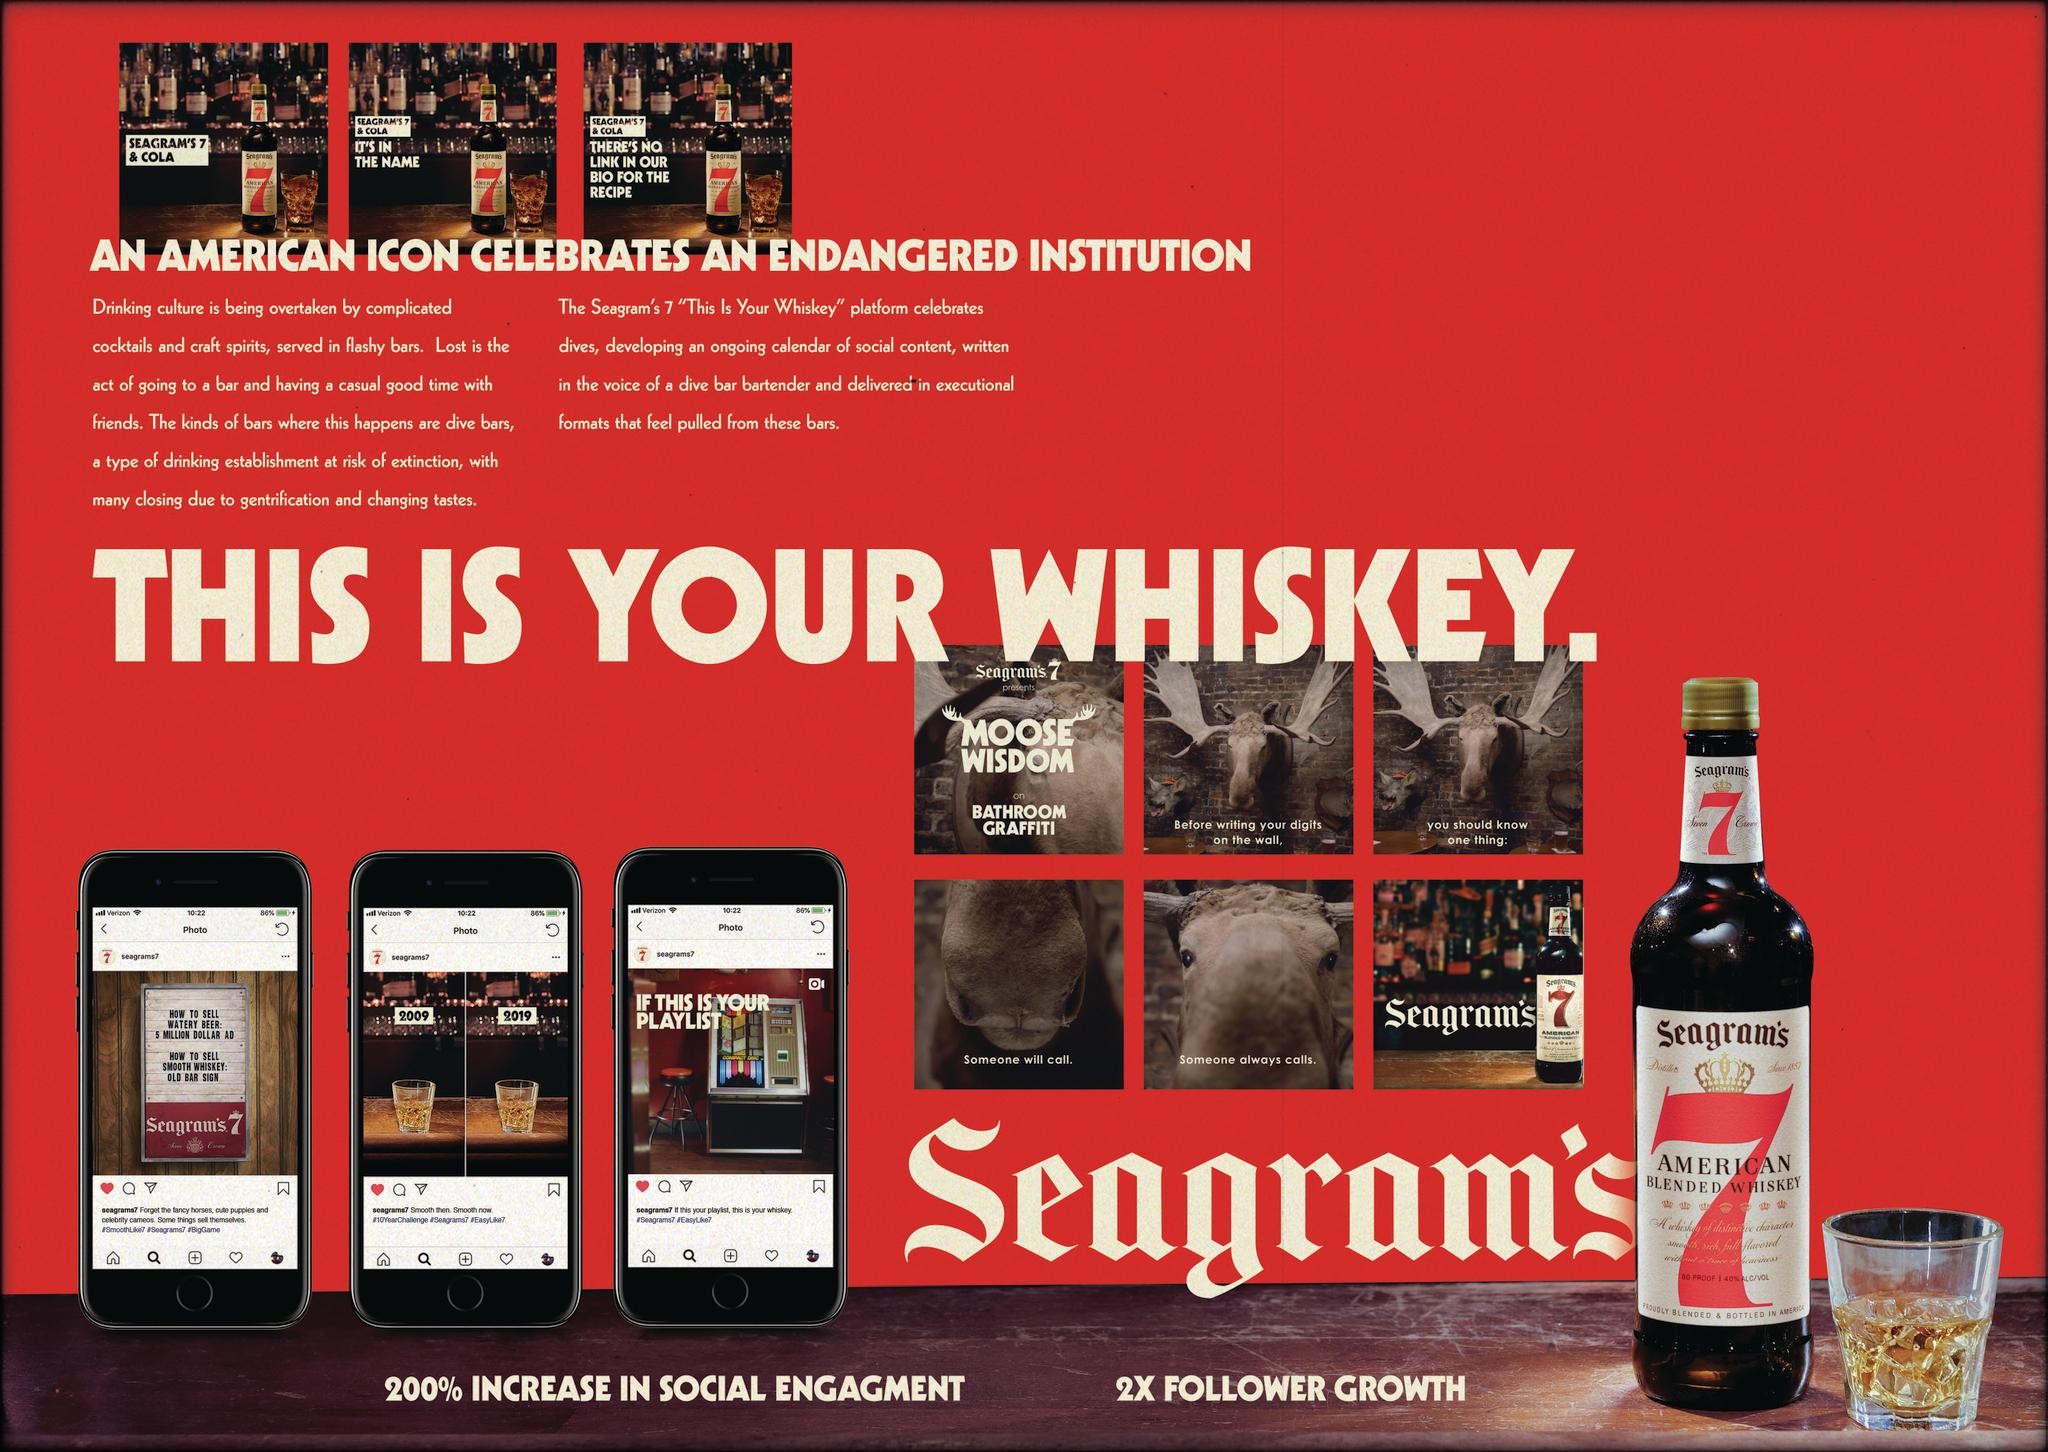 This is Your Whiskey